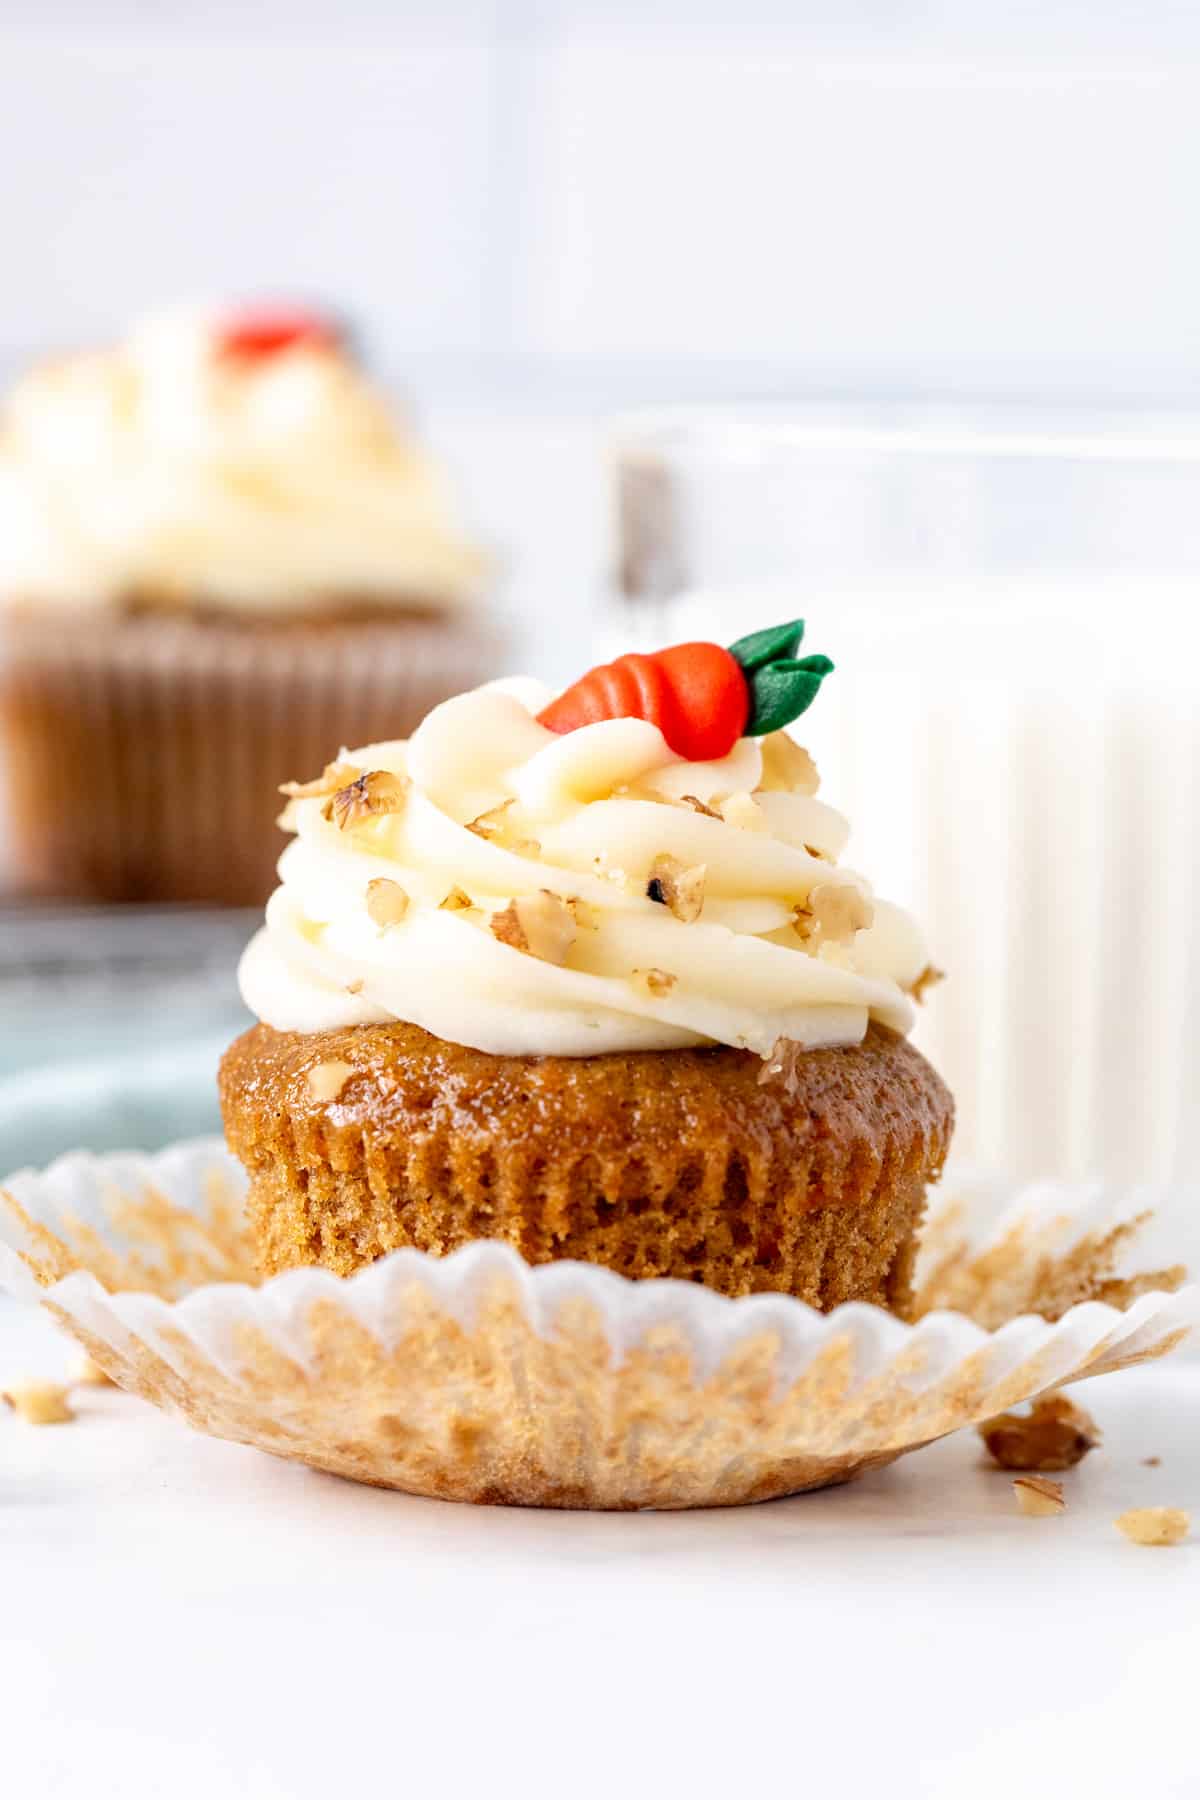 Carrot cake cupcake with muffin paper peeled back